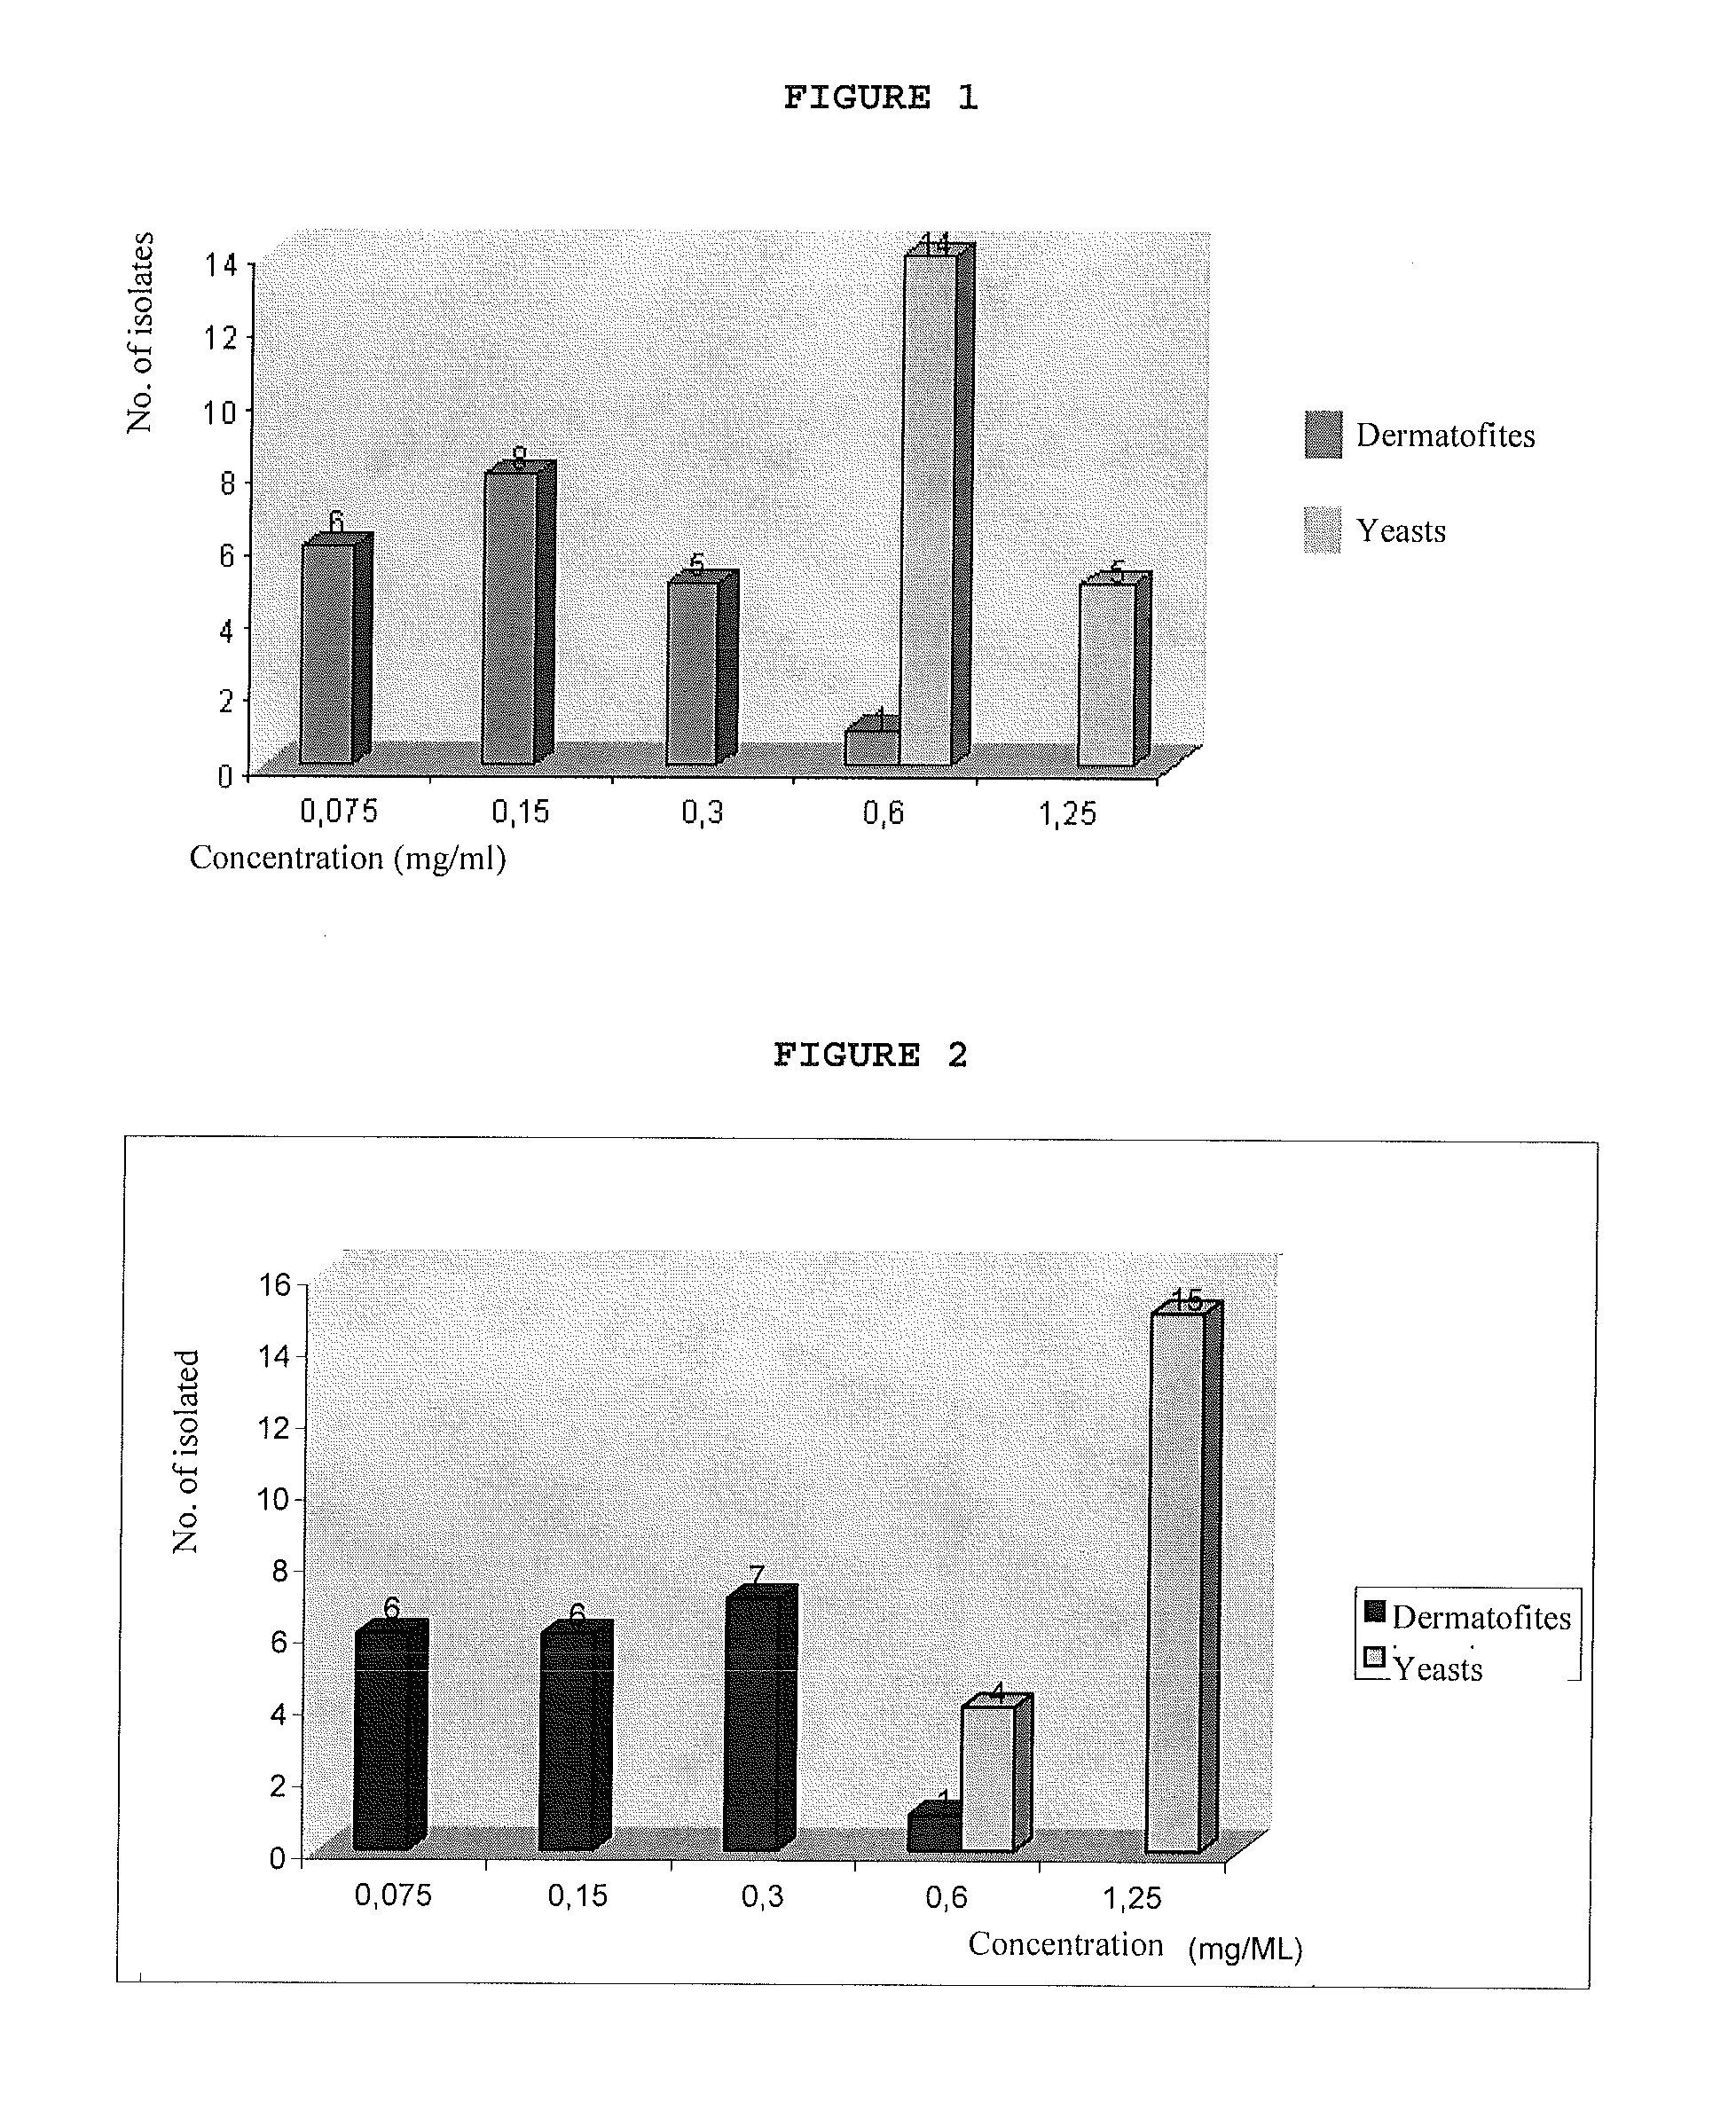 Pharmaceutical composition with antifungal activity containing cymbopogon nardus, its process, and use